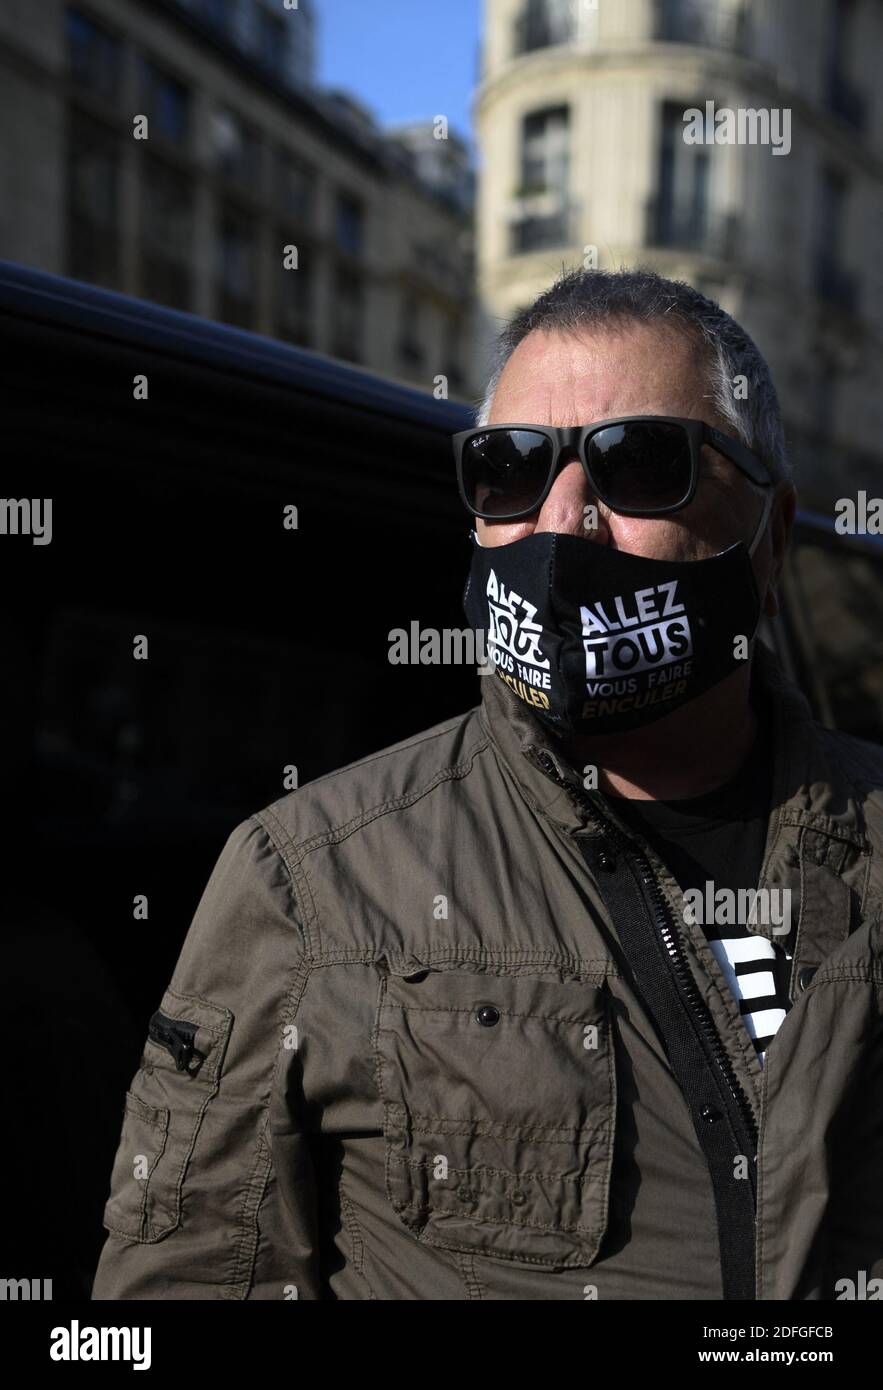 French humourist Jean-Marie Bigard wearing a protectice face mask arrives  to take part in a demonstration called by the "yellow vest" (gilets jaunes)  movement on September 12, 2020 in Paris. Photo by